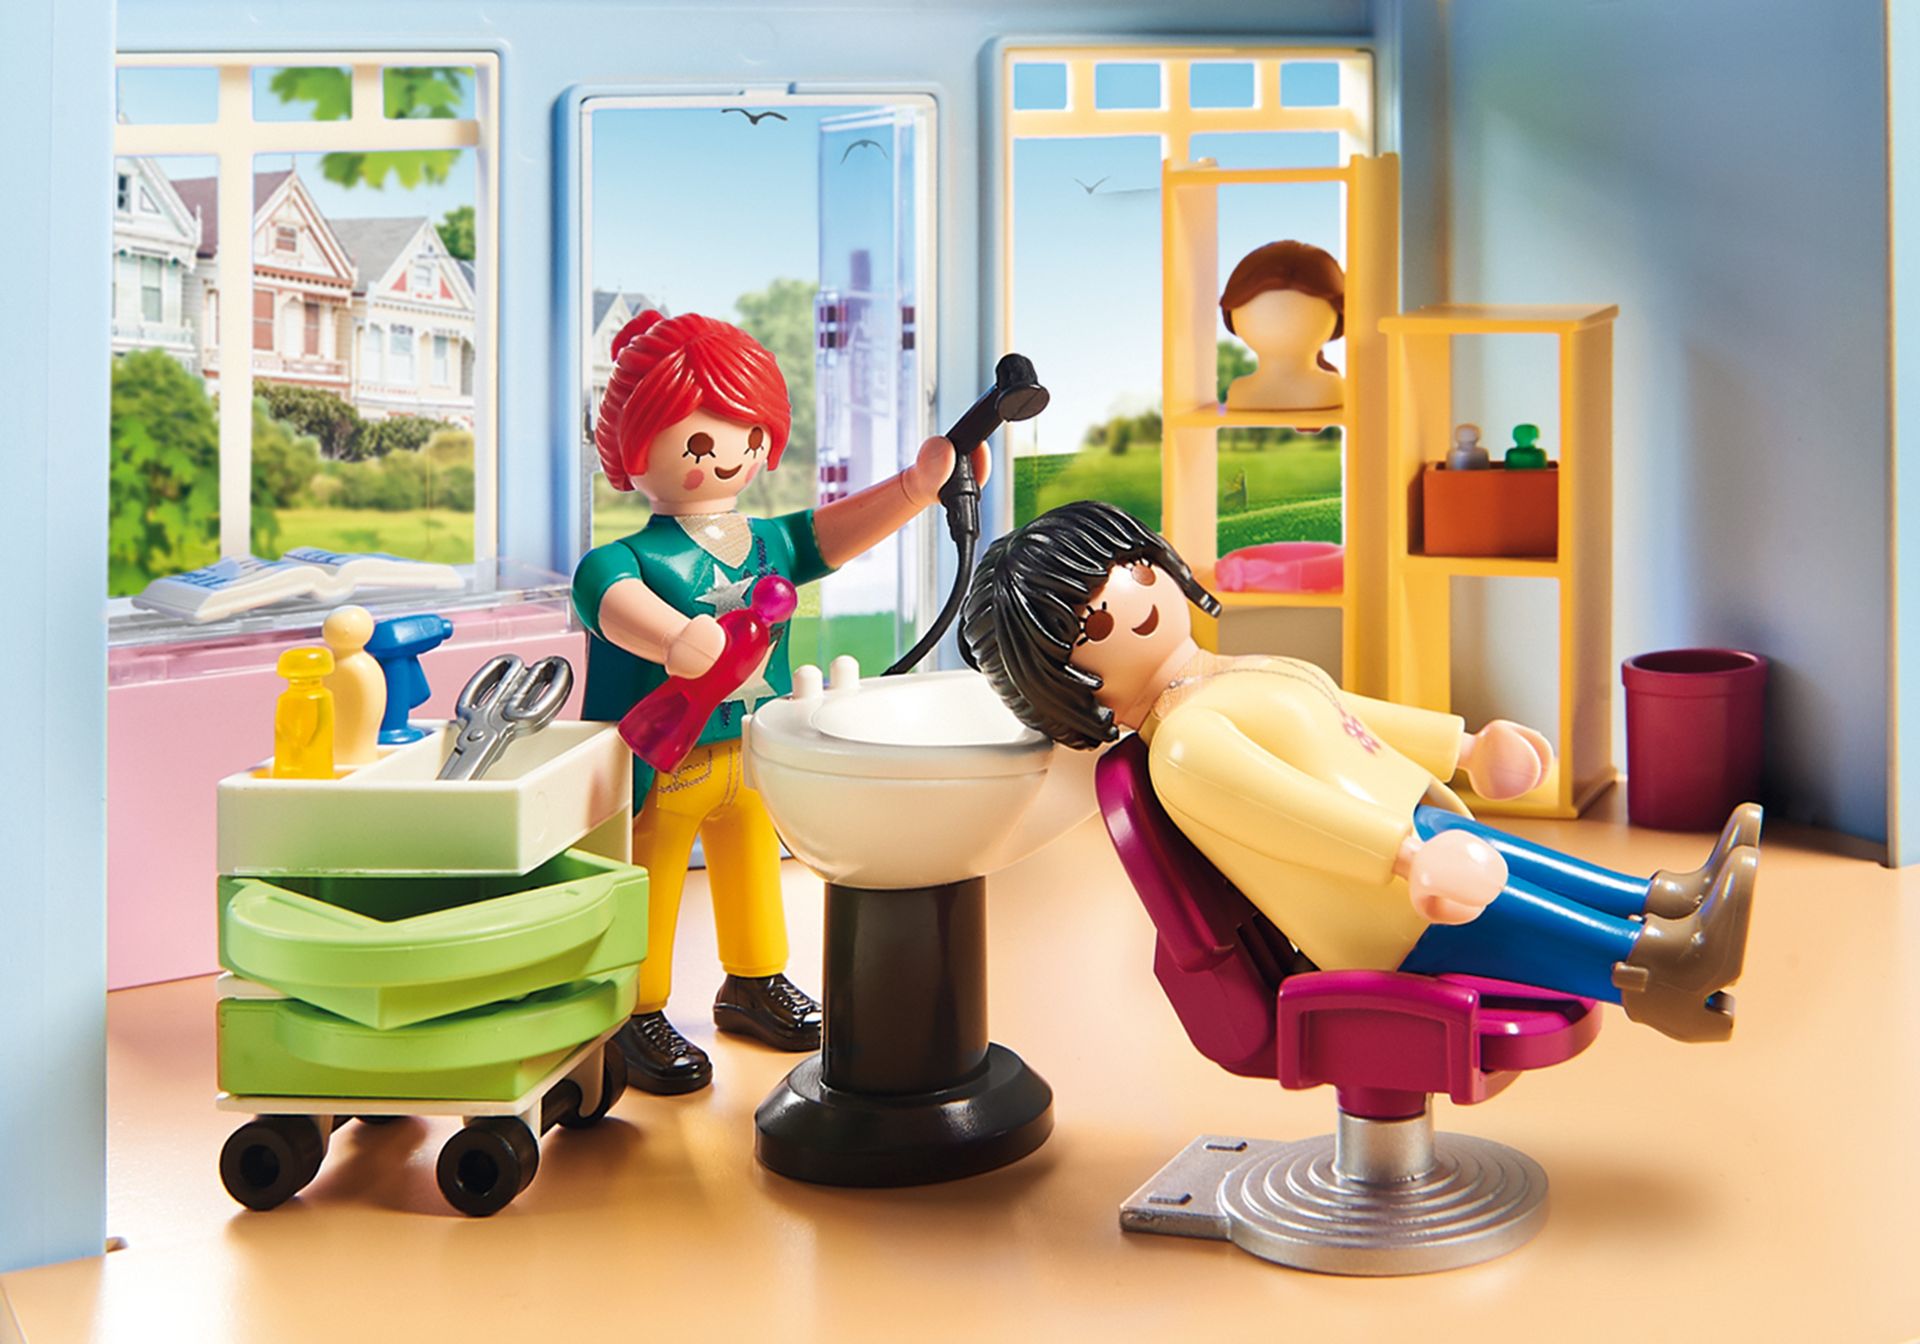 for Children Ages 4+ Playmobil 70376 City Life My Little Town My Hair Salon